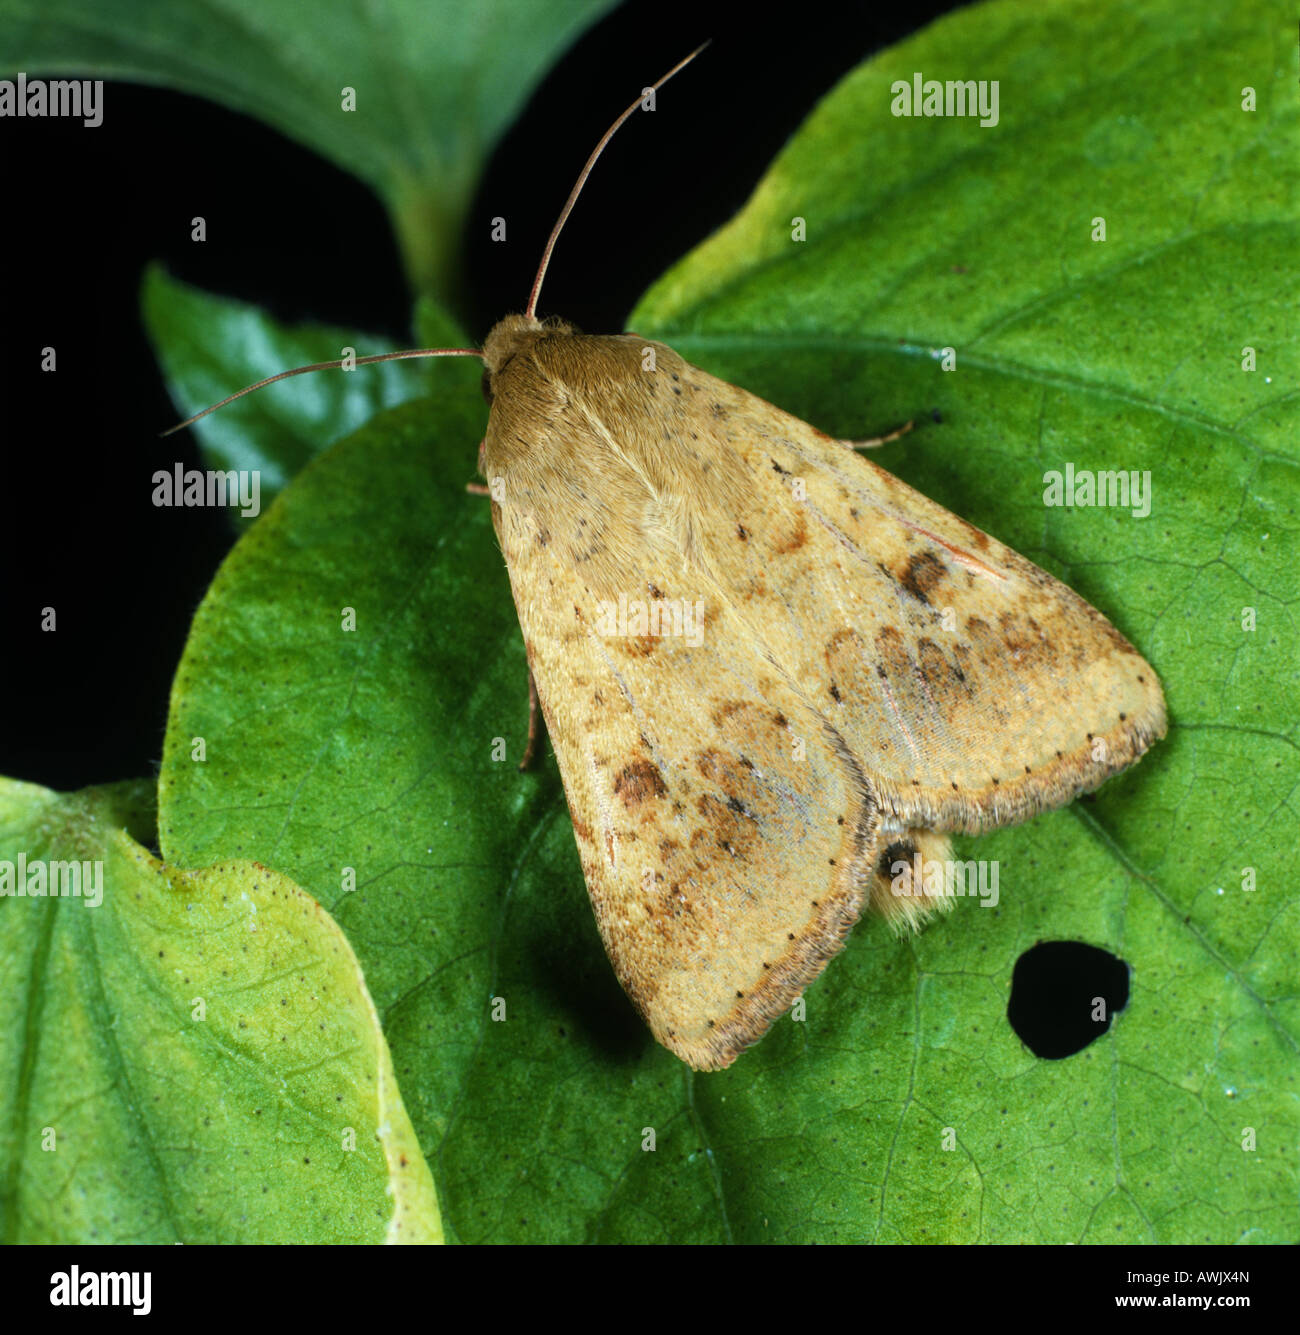 Moth of African Cotton or old world bollworm, Helibcoverpa armigera, on a cotton leaf. Stock Photo